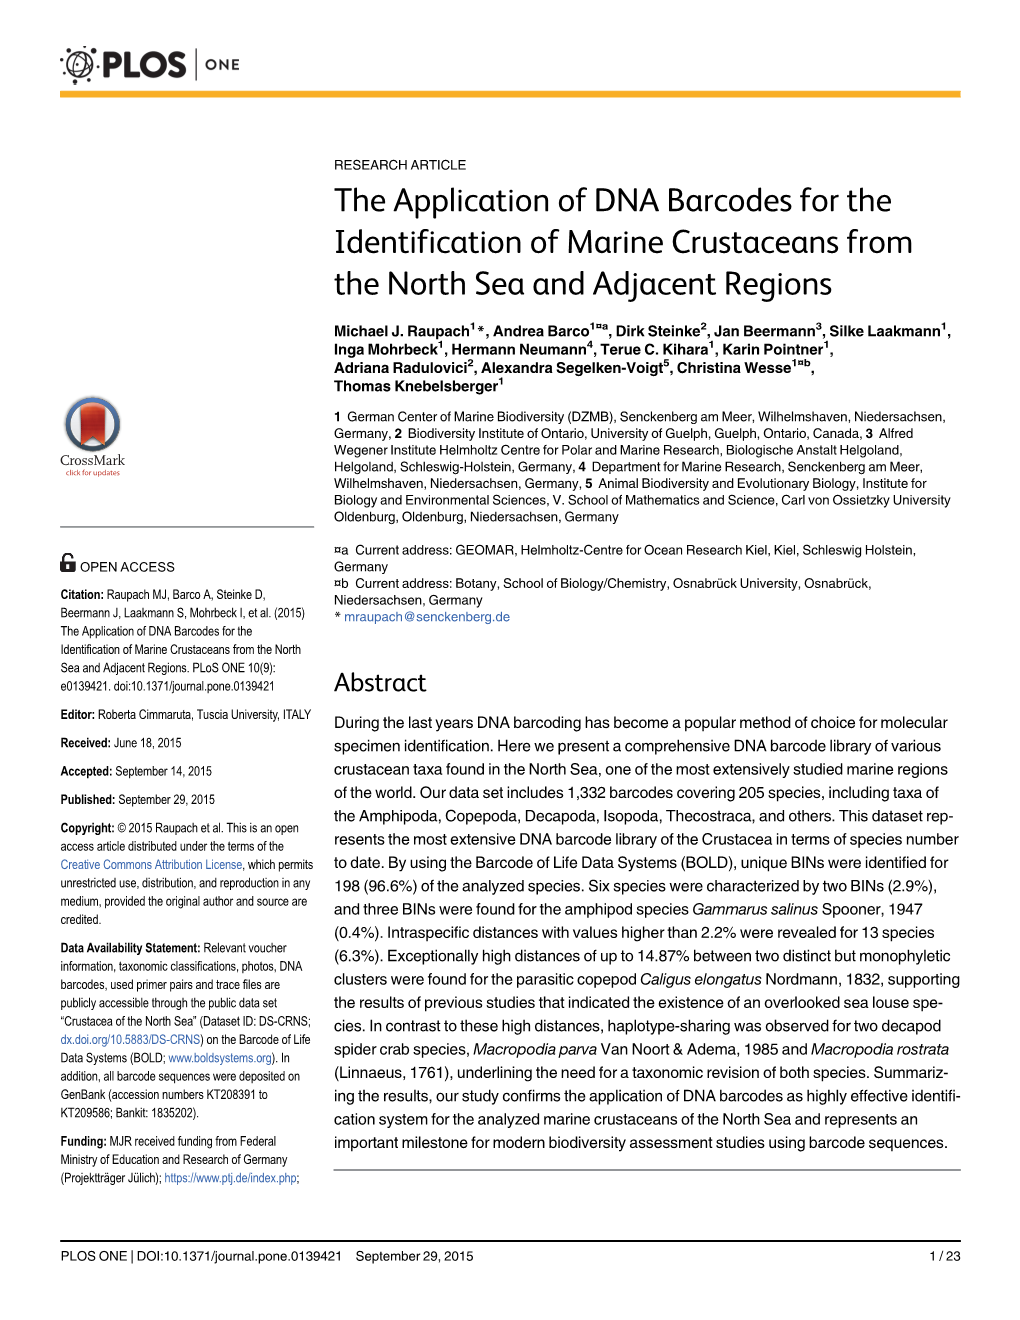 The Application of DNA Barcodes for the Identification of Marine Crustaceans from the North Sea and Adjacent Regions